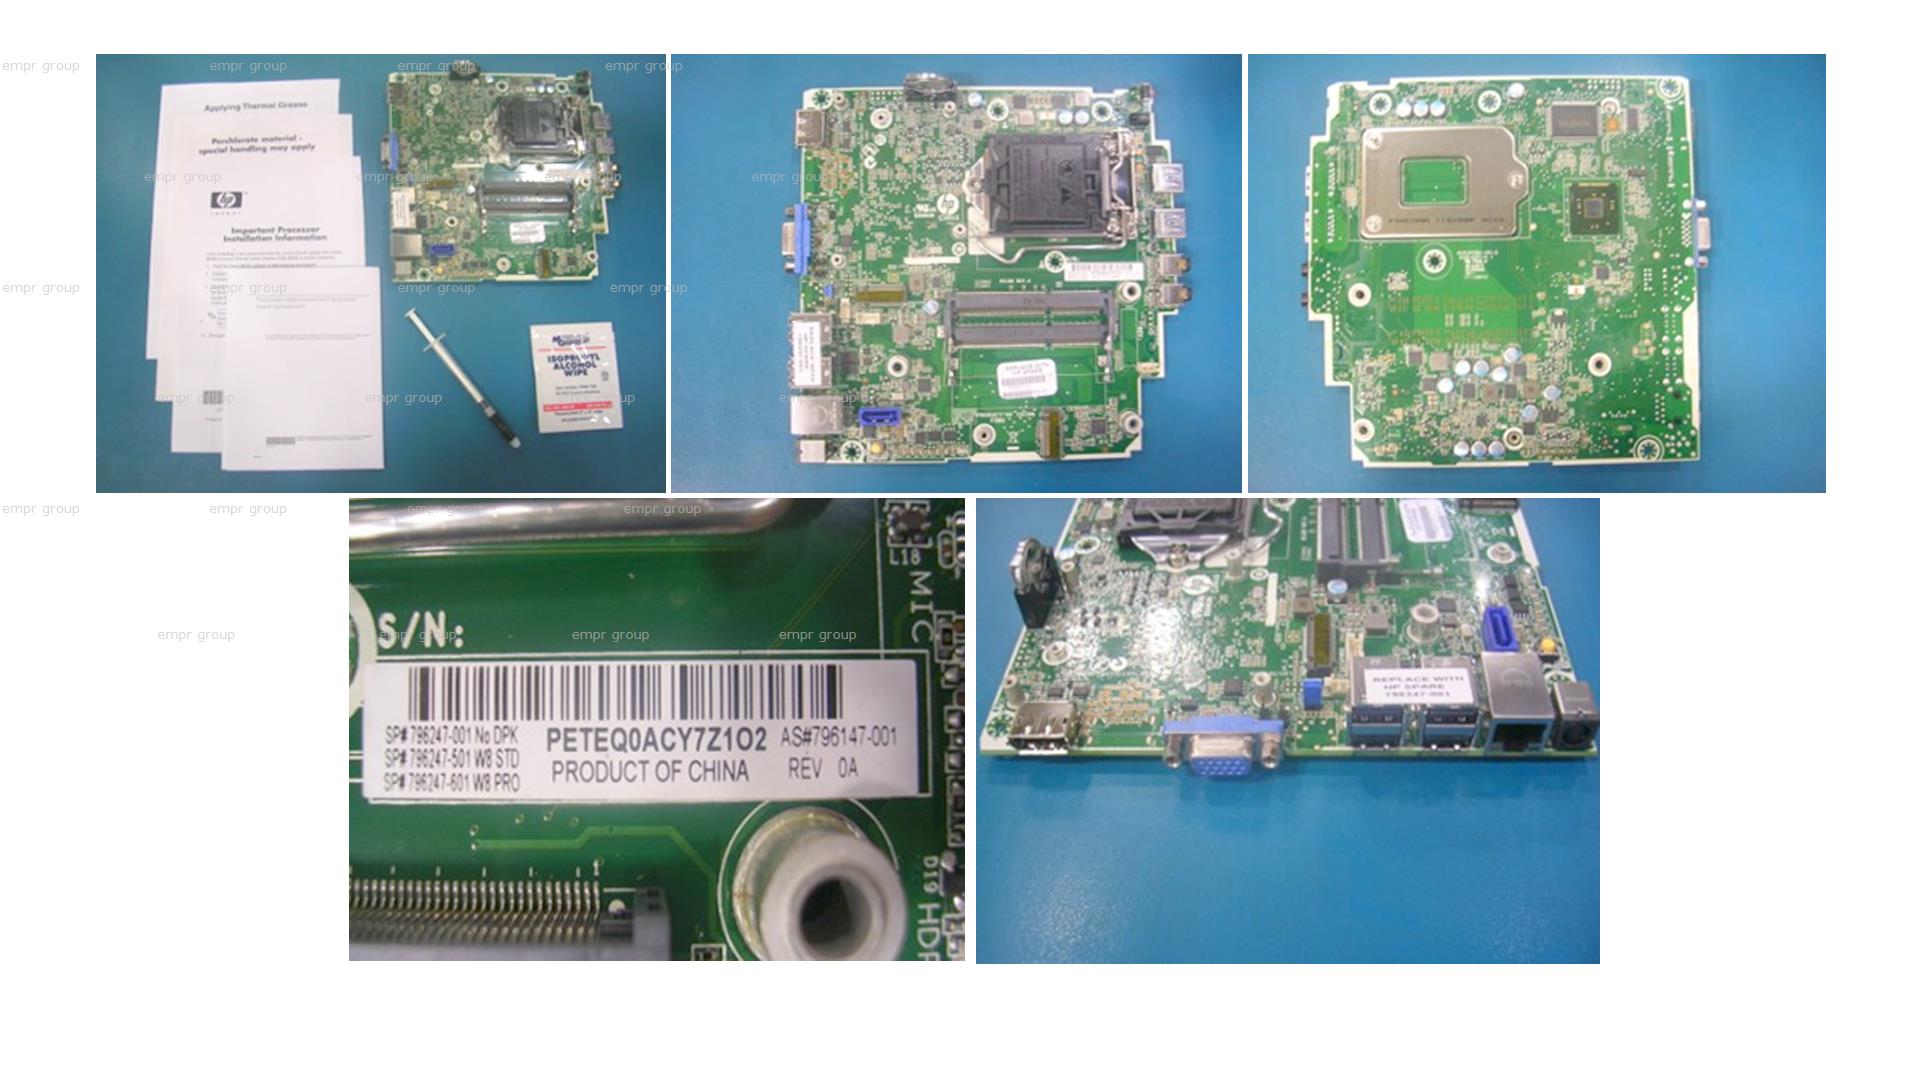 HP PRODESK 400 G1 SMALL FORM FACTOR PC - N0D63ES PC Board 796247-501